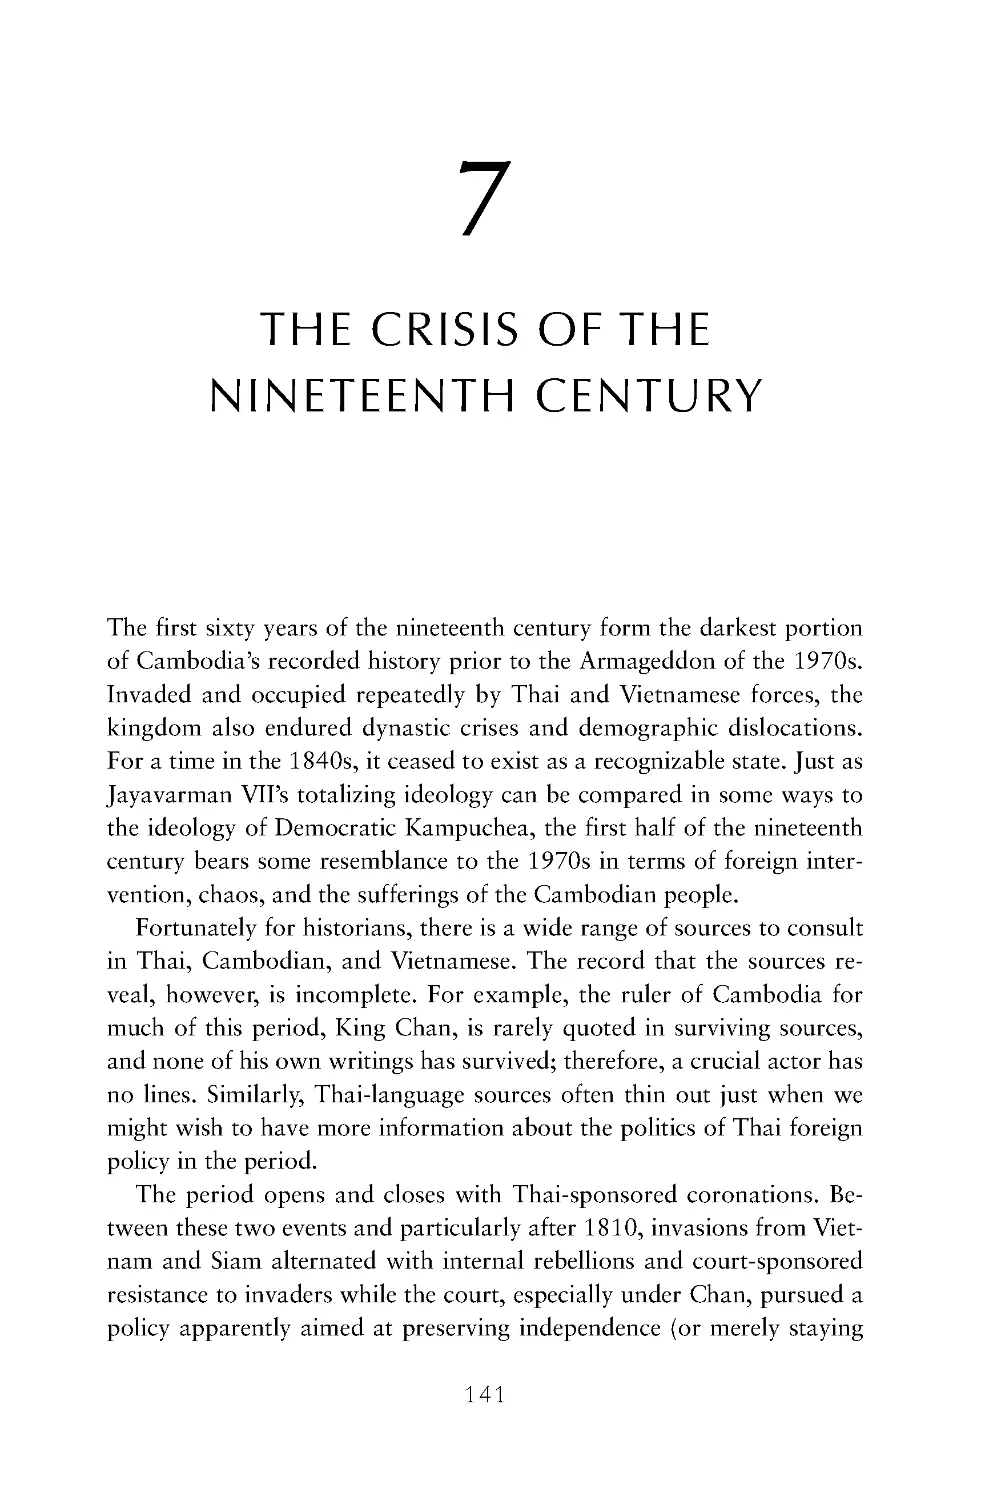 7. The Crisis of the Nineteenth Century